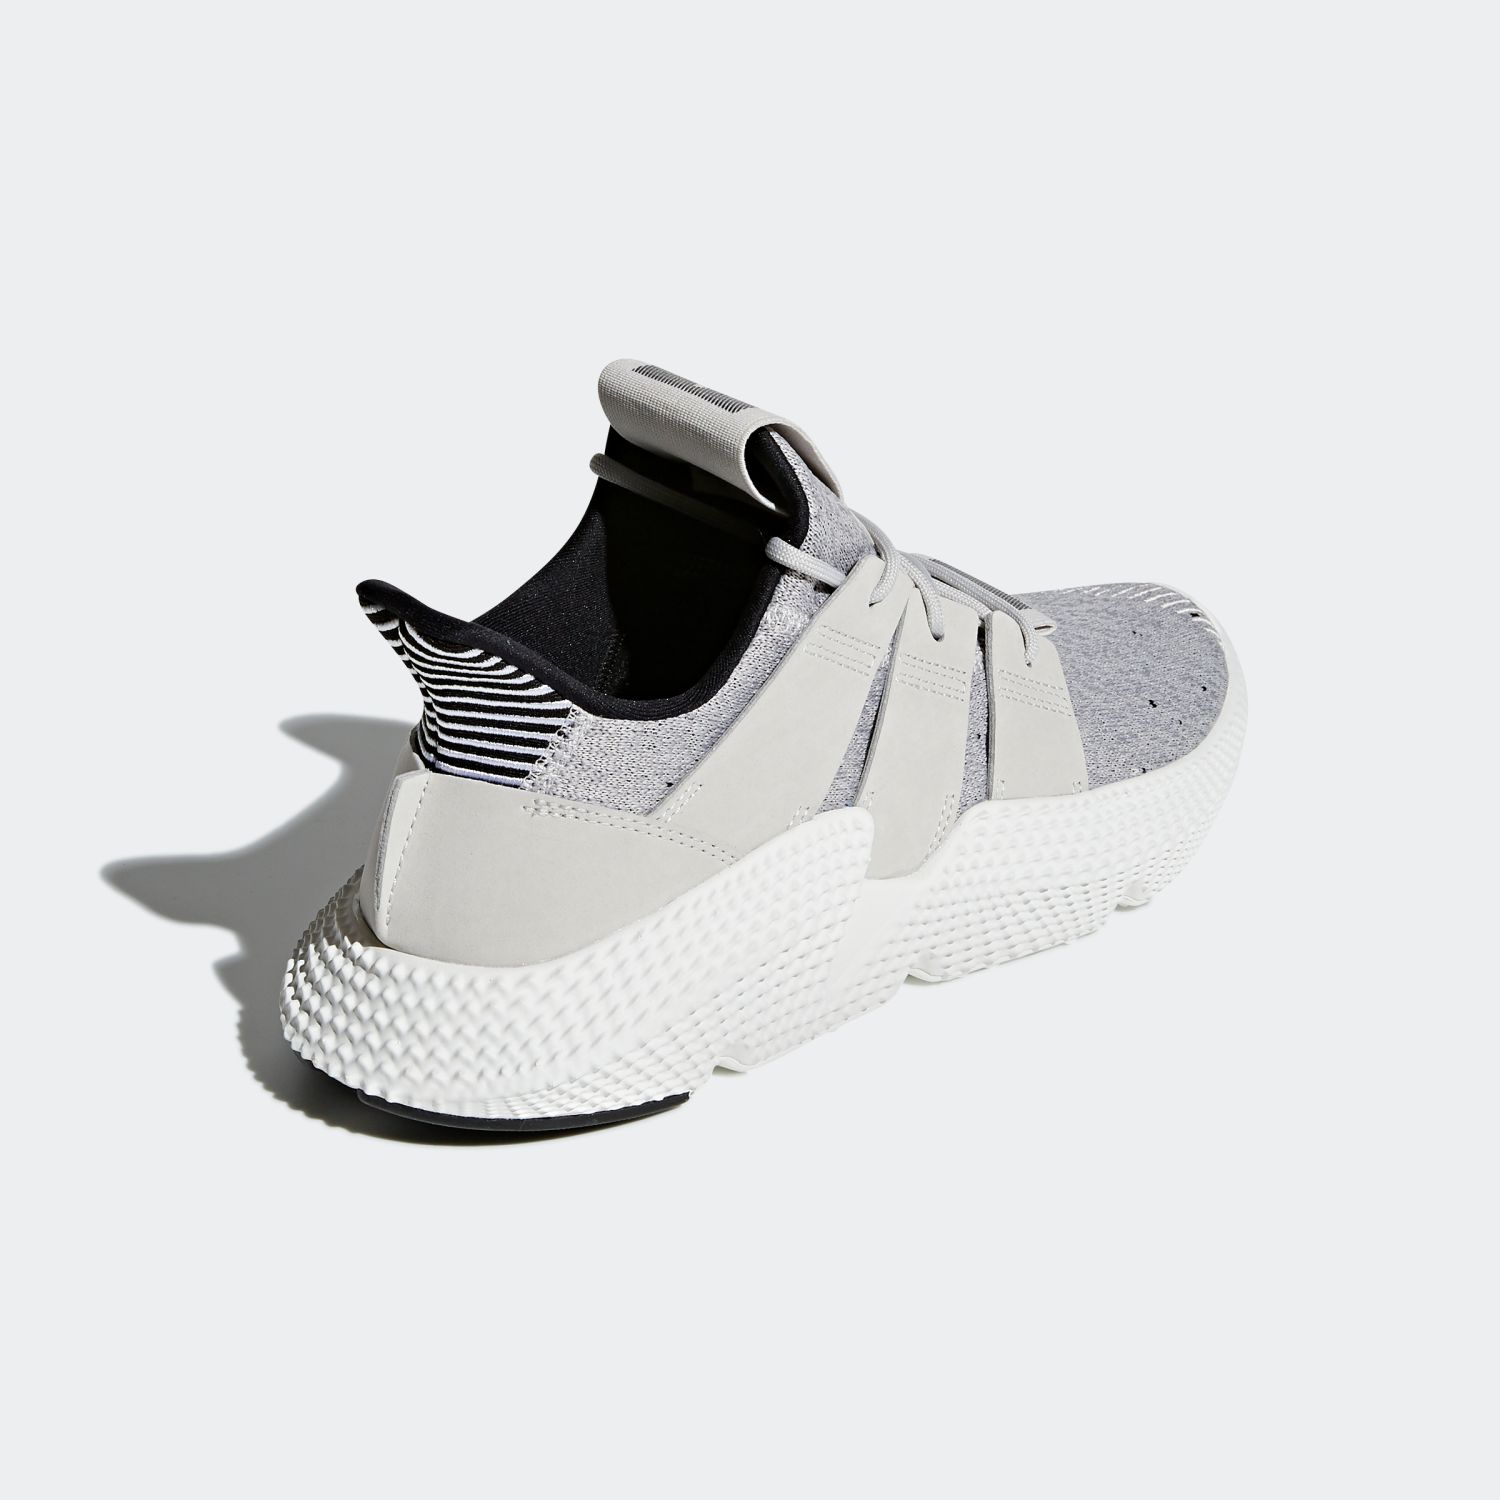 PROPHERE GREY ONE